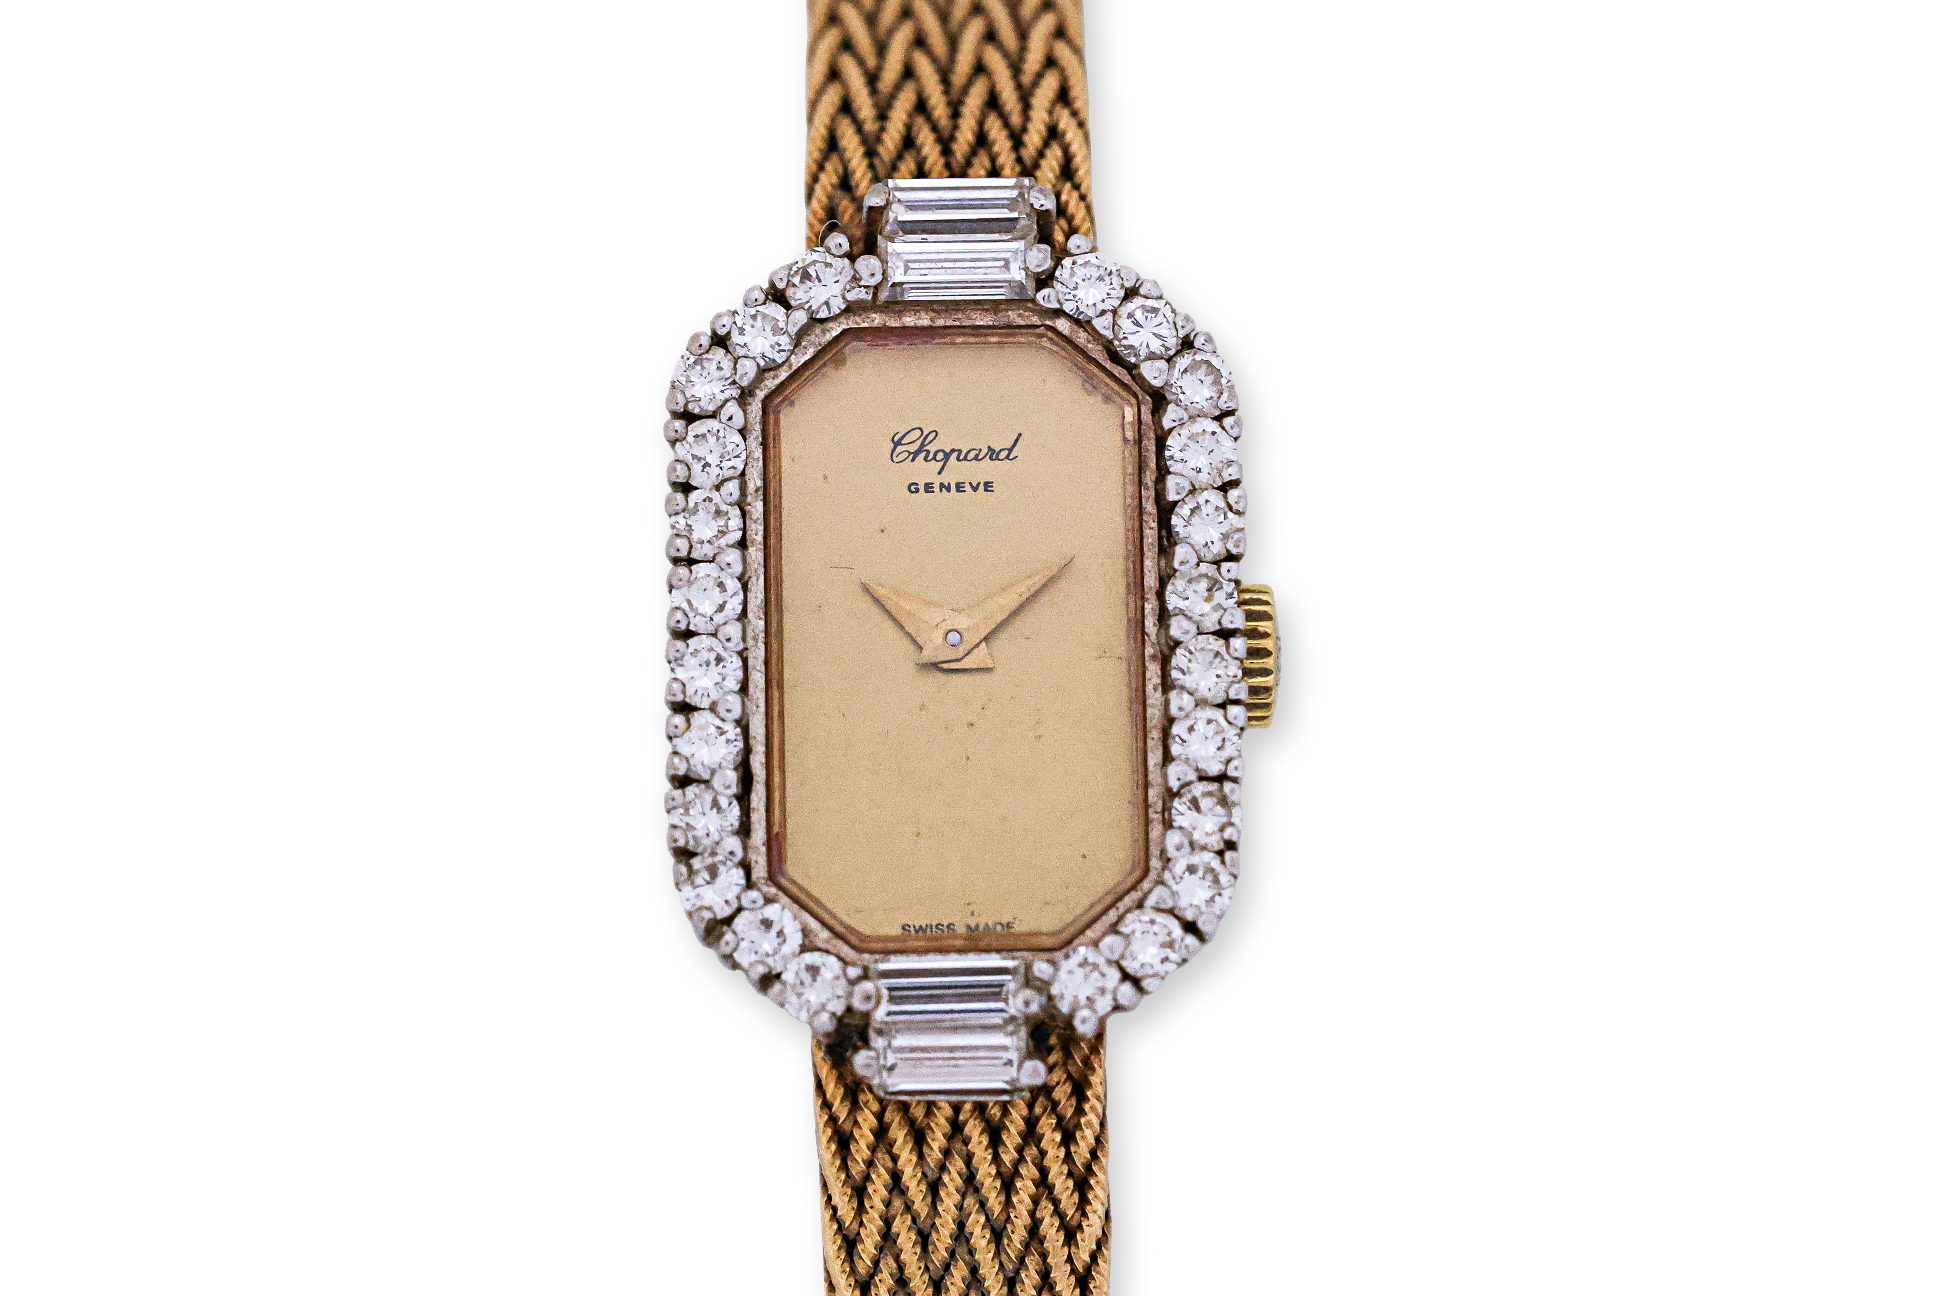 A CHOPARD LADIES GOLD AND DIAMOND COCKTAIL WATCH